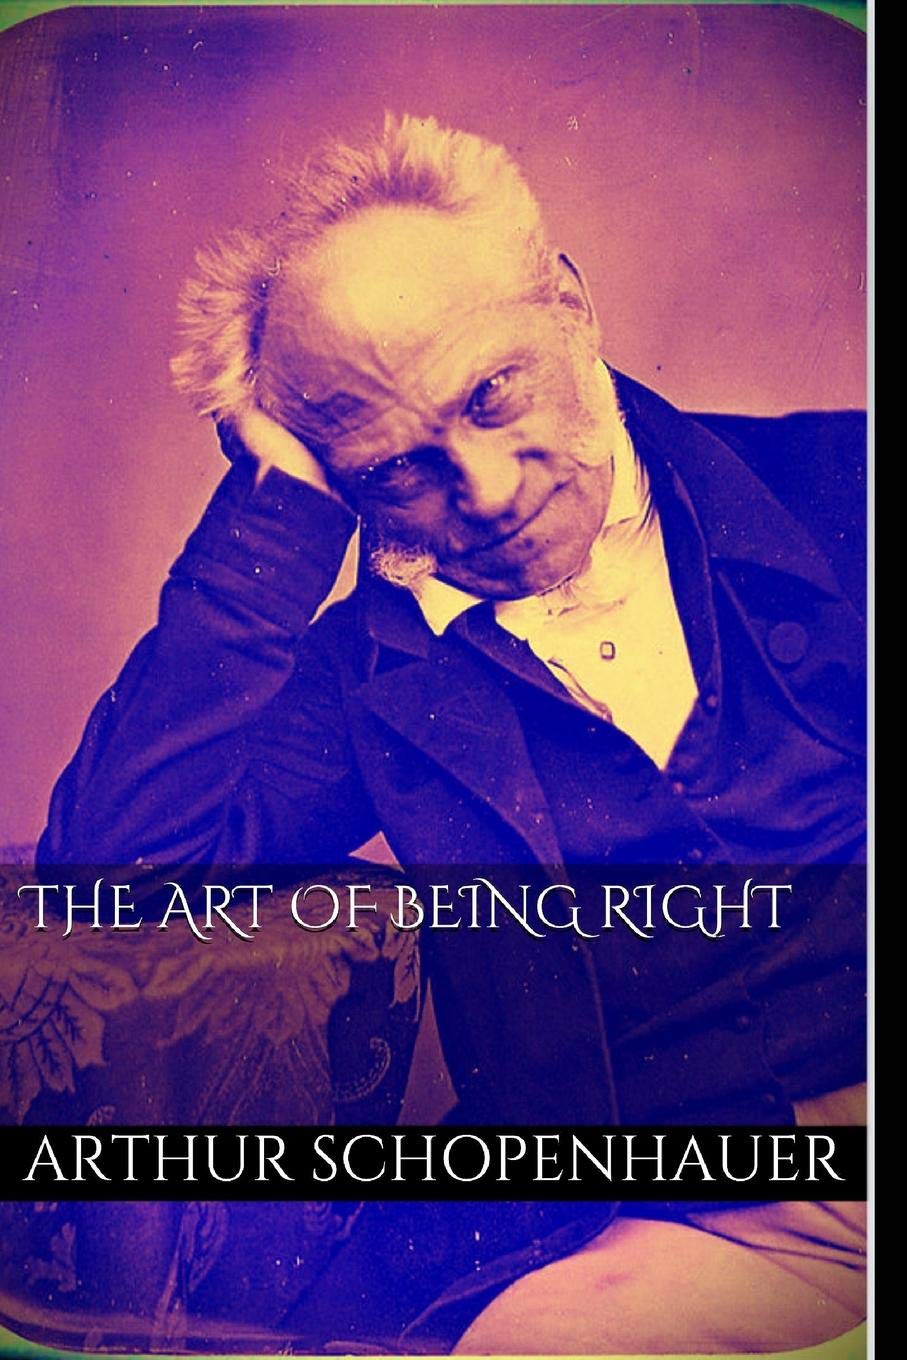 The Art of Being Right